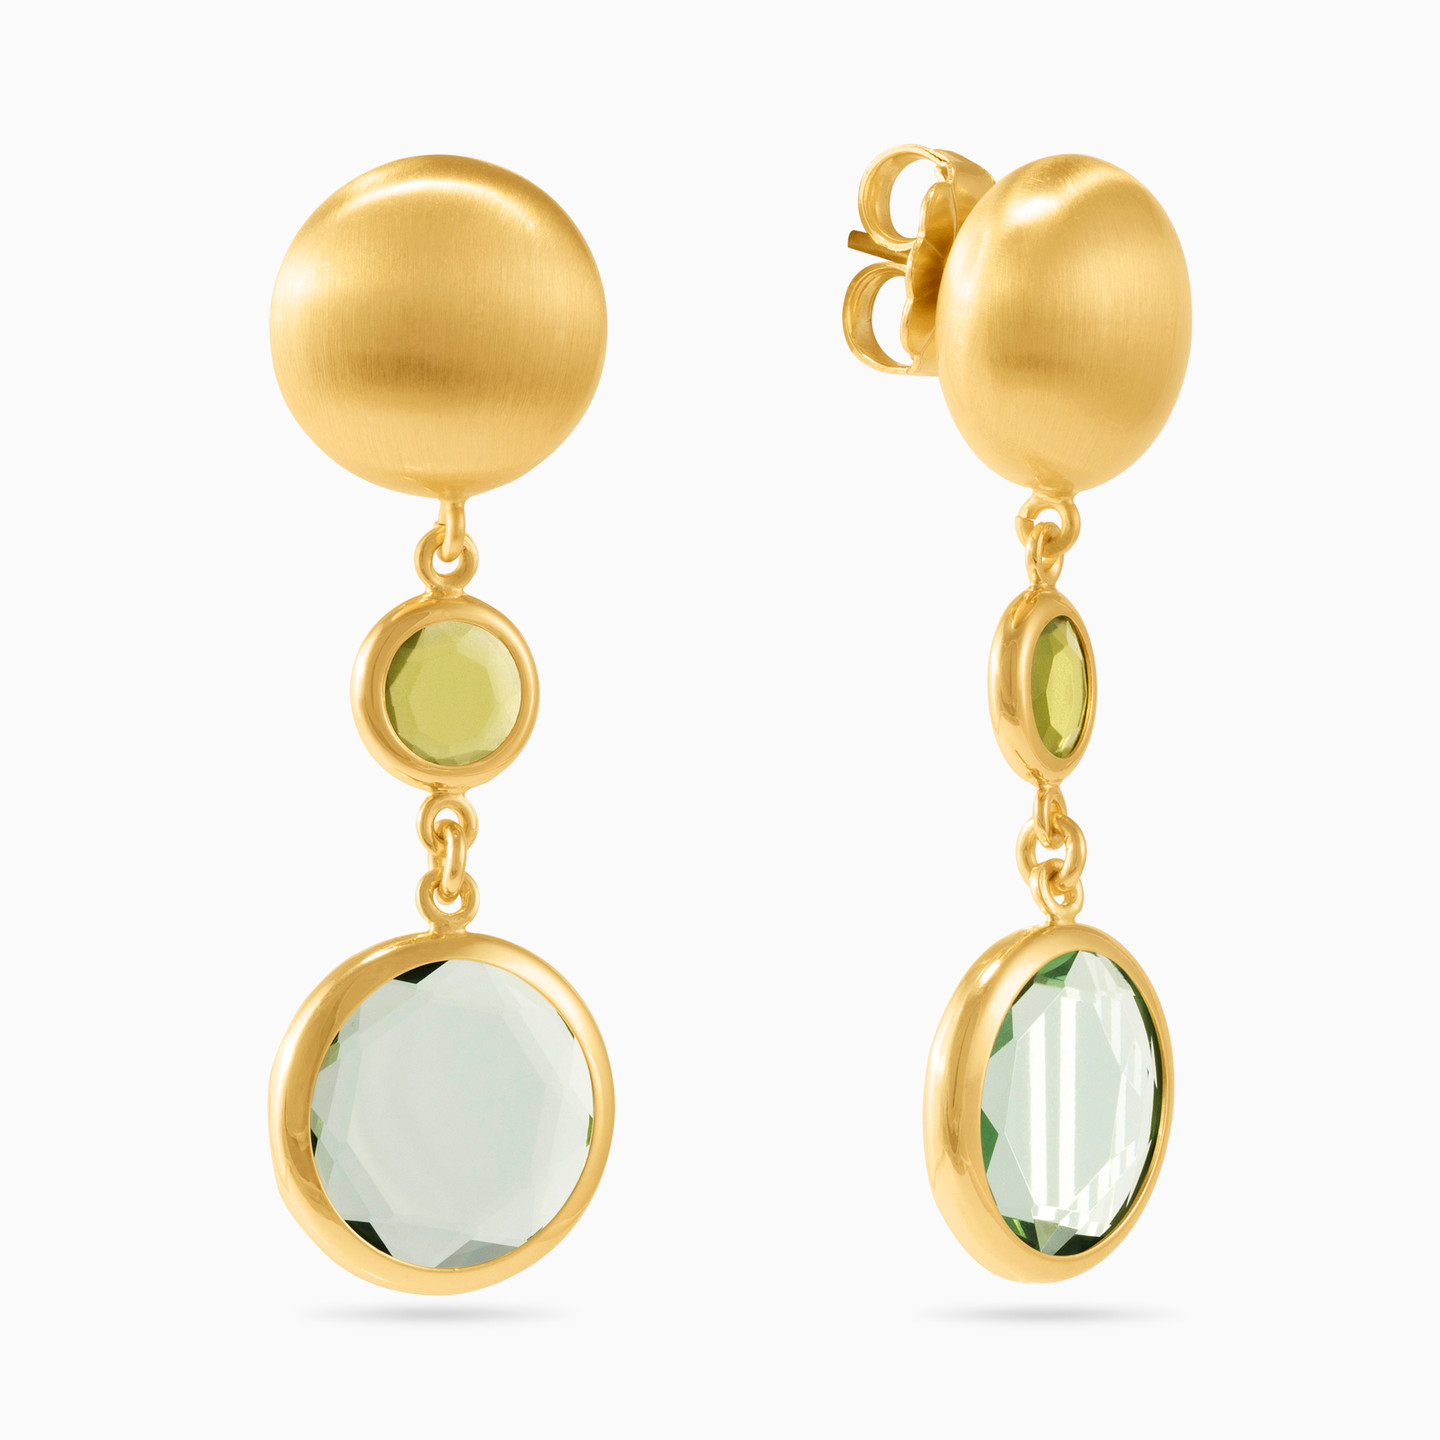 Gold Plated Colored Stones Drop Earrings - 2